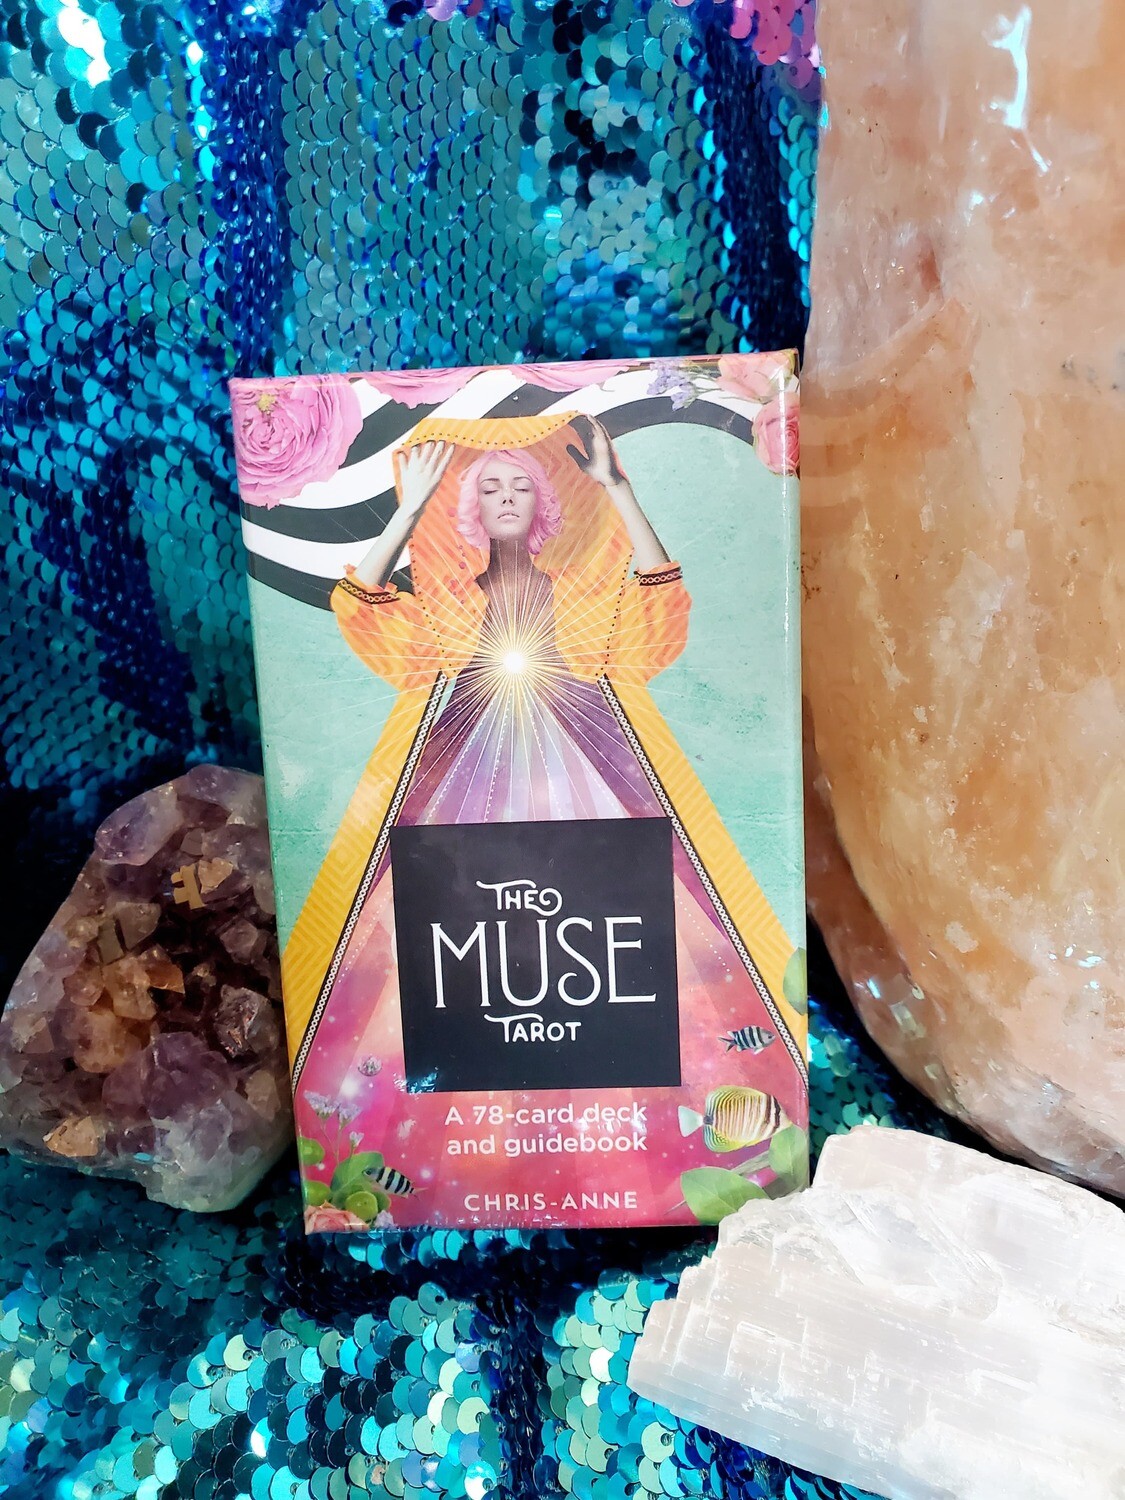 Muse　Clarity　RELEASE　Chris-Anne　The　–　Love　Tarot　Star　Store　by　Deck　–　NEW　LLC